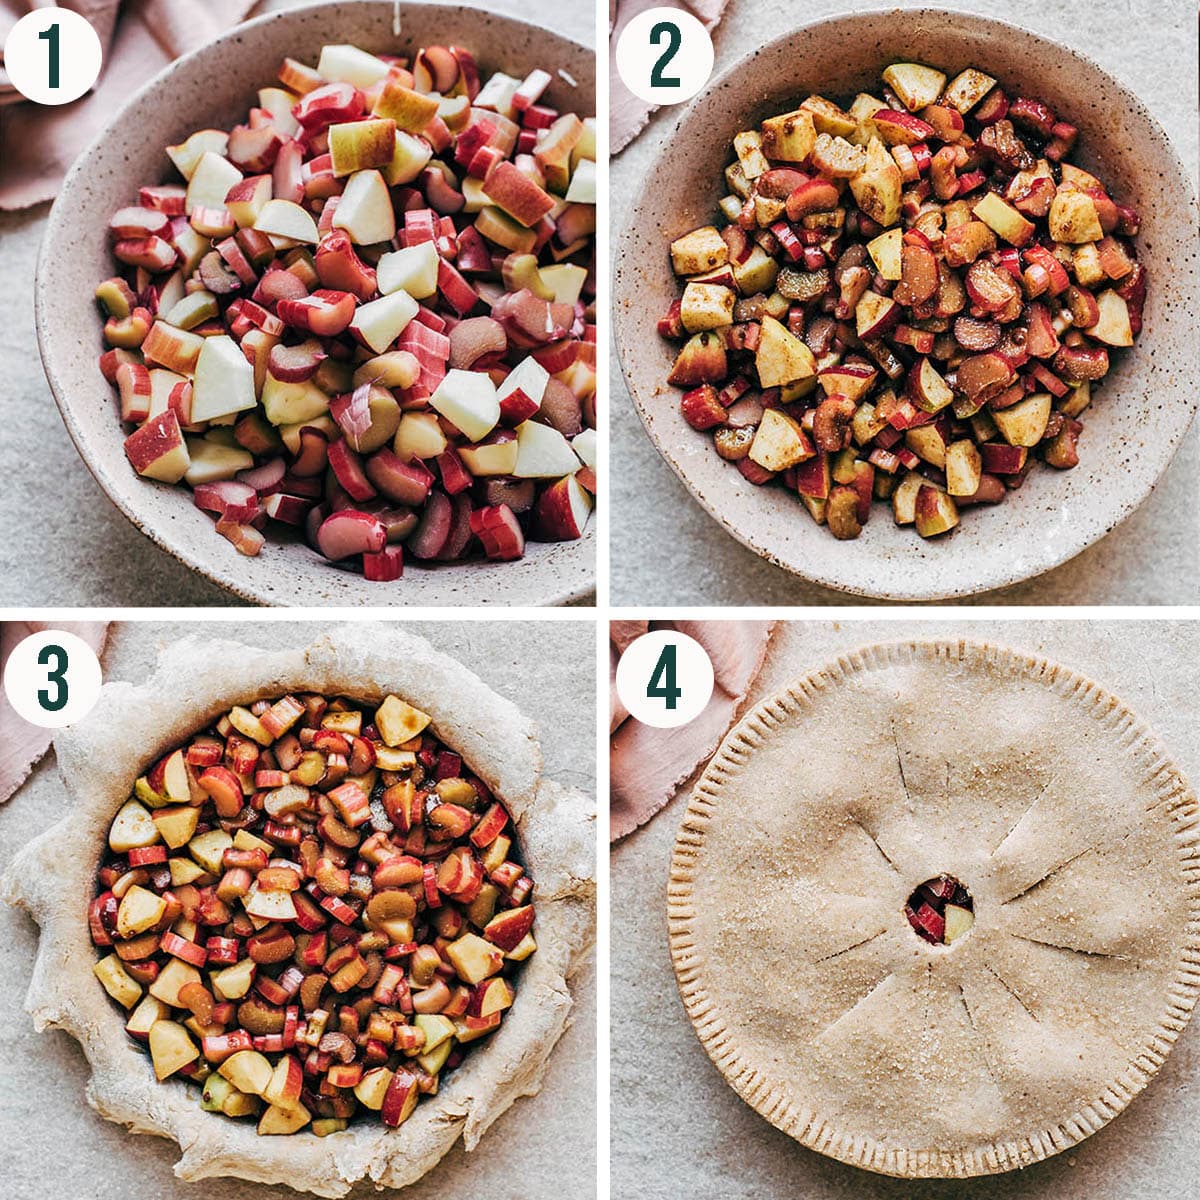 Apple rhubarb pie steps 1 to 4, mixing fruit in a bowl, filled pie crust, and unbaked pie.